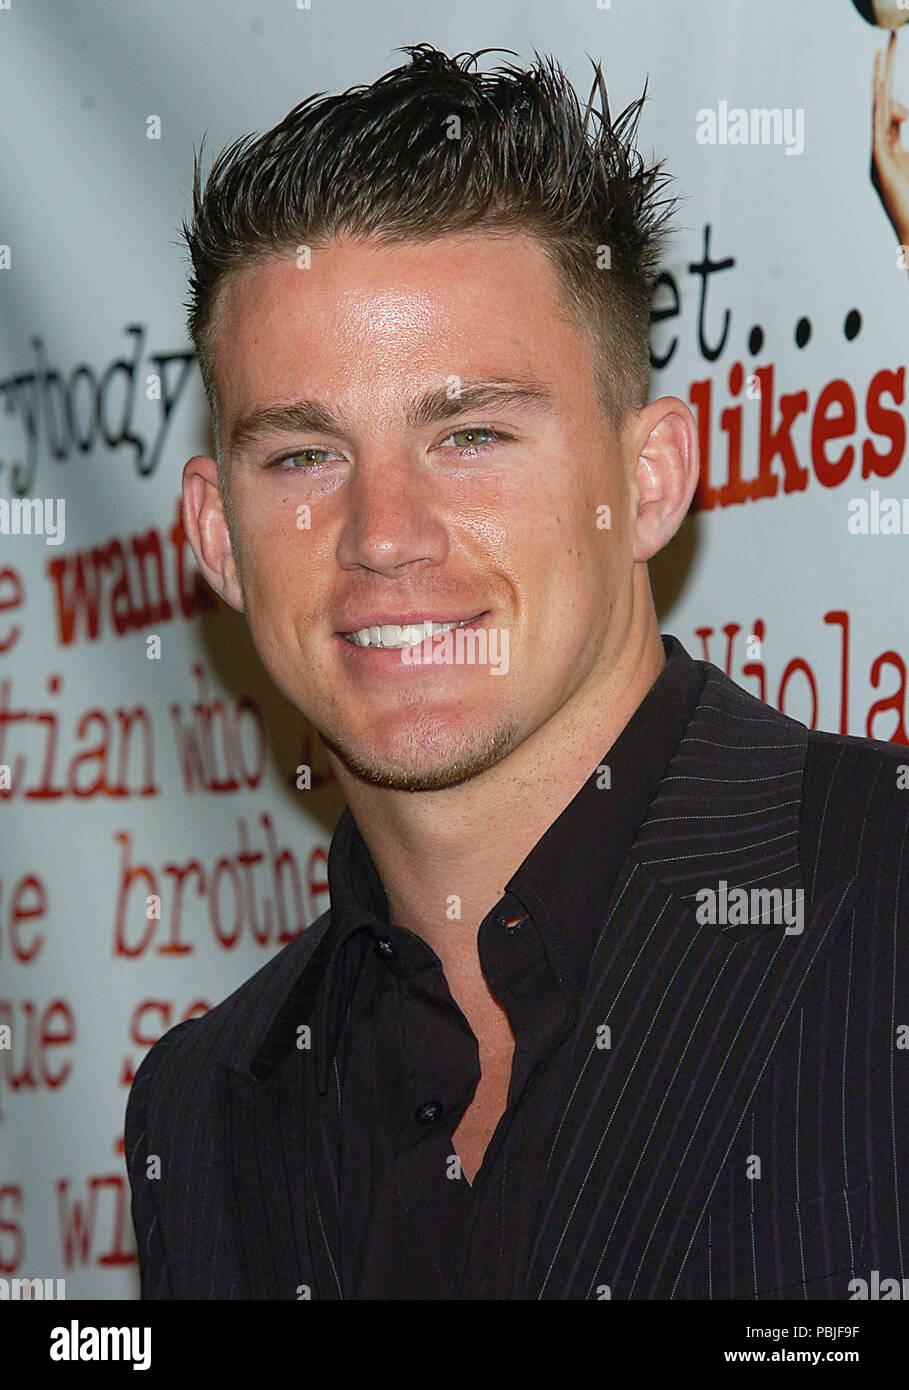 Channing  Tatum arriving at the She's The Man Premiere at the Westwood Village Theatre In Los Angeles.. March 8, 2006TatumChanning018 Red Carpet Event, Vertical, USA, Film Industry, Celebrities,  Photography, Bestof, Arts Culture and Entertainment, Topix Celebrities fashion /  Vertical, Best of, Event in Hollywood Life - California,  Red Carpet and backstage, USA, Film Industry, Celebrities,  movie celebrities, TV celebrities, Music celebrities, Photography, Bestof, Arts Culture and Entertainment,  Topix, headshot, vertical, one person,, from the year , 2006, inquiry tsuni@Gamma-USA.com Stock Photo